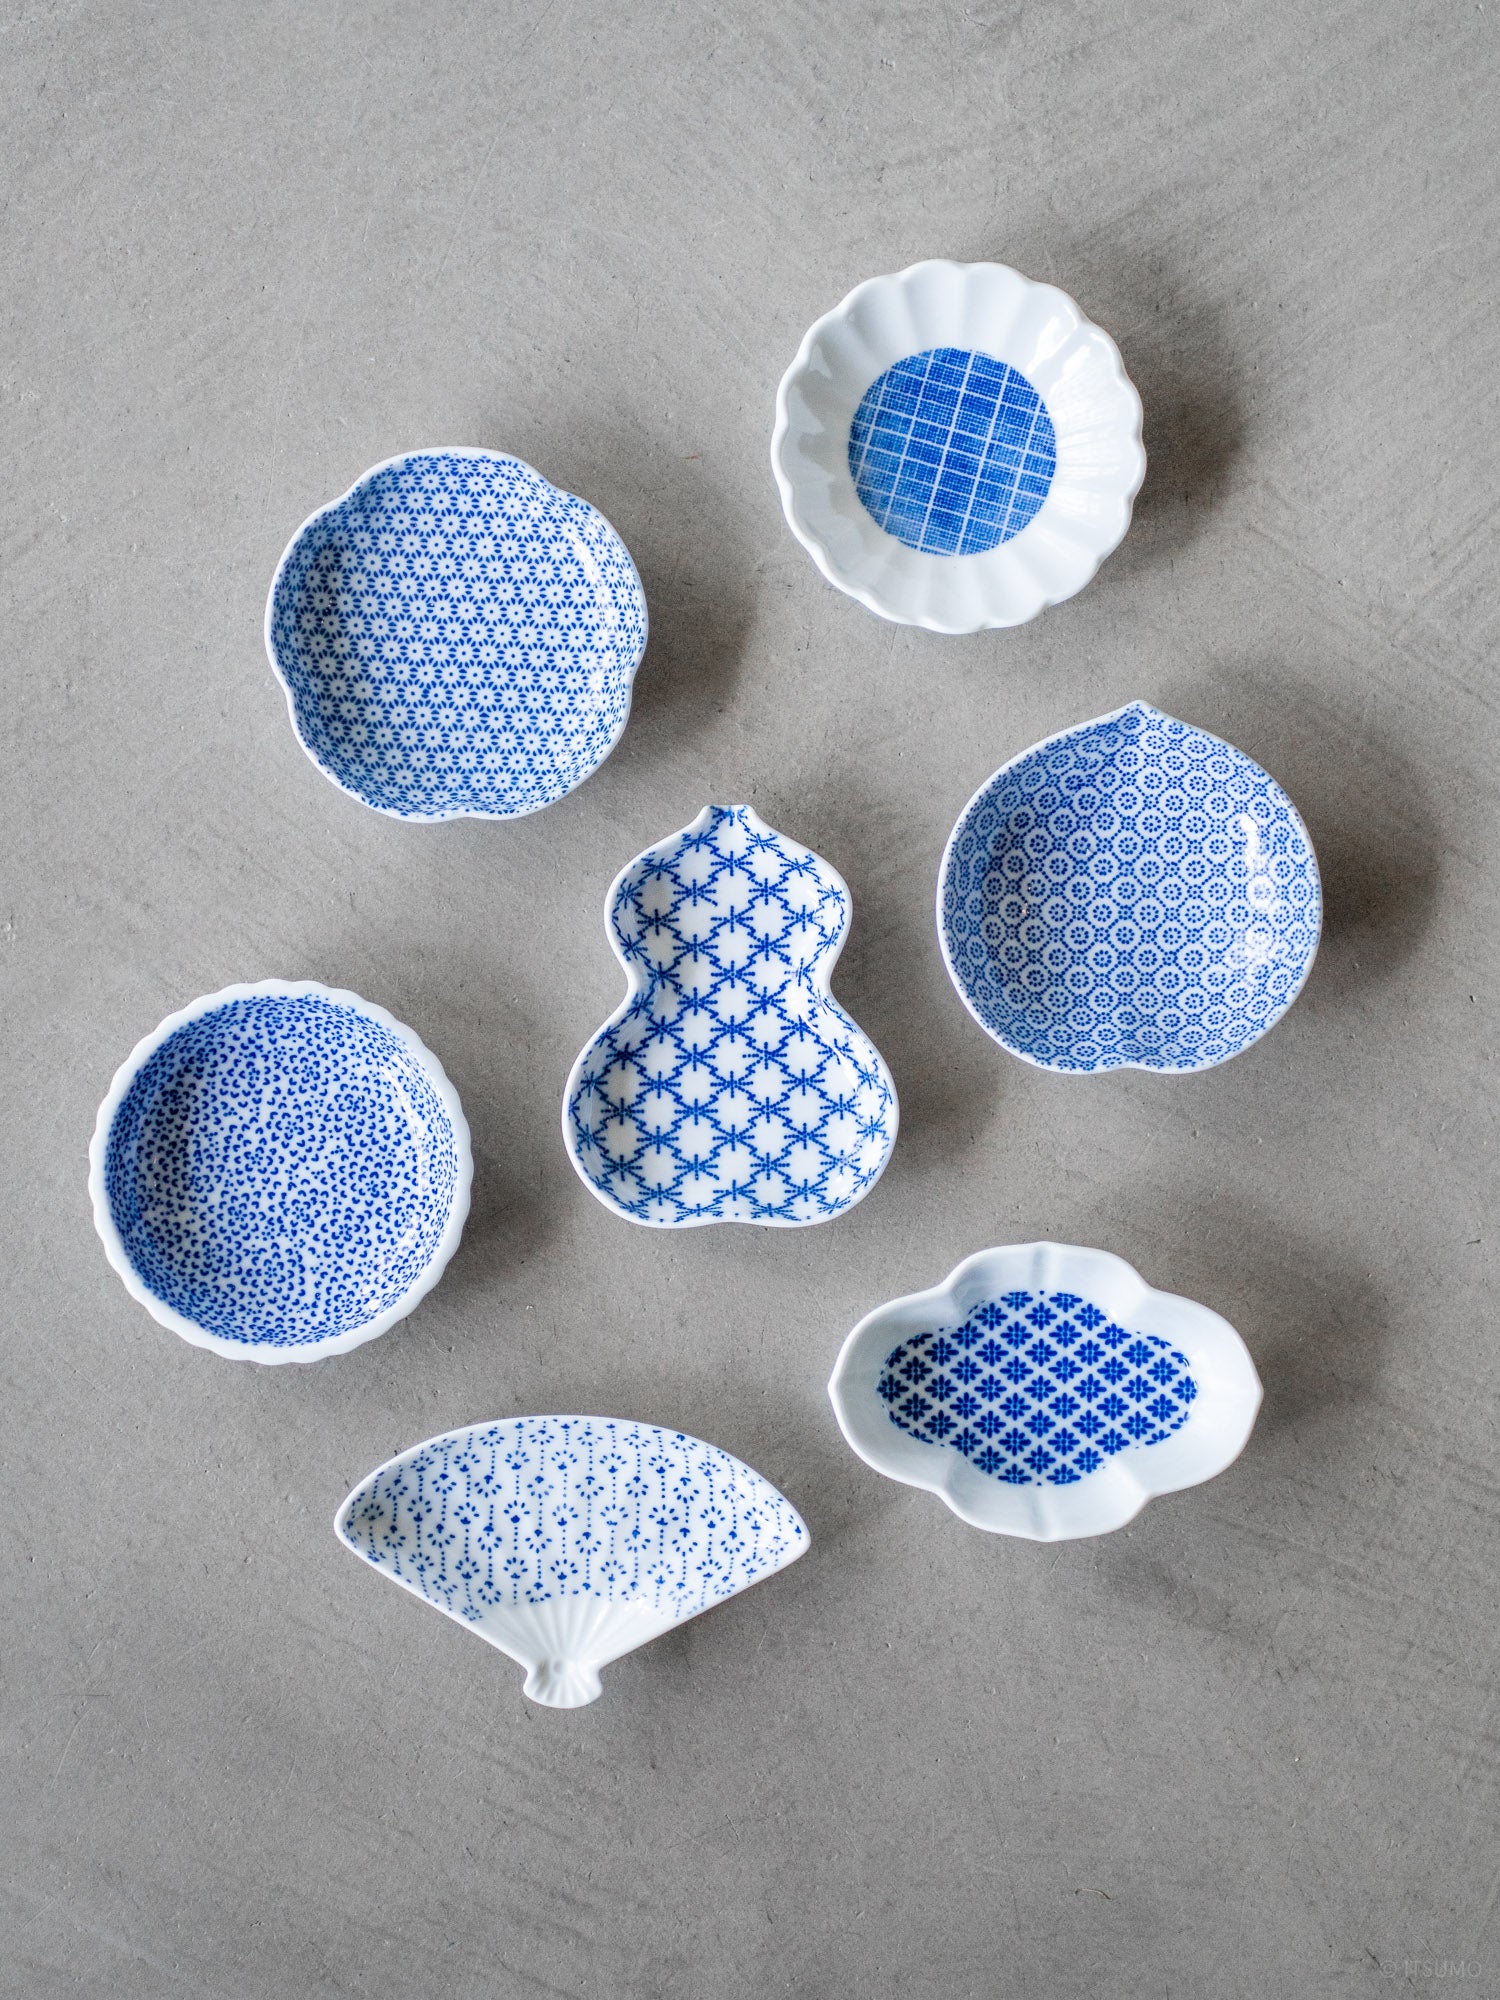 Azmaya small blue porcelain dishes in various shapes and patterns used for serving small things, soy sauce, spices or garnishes